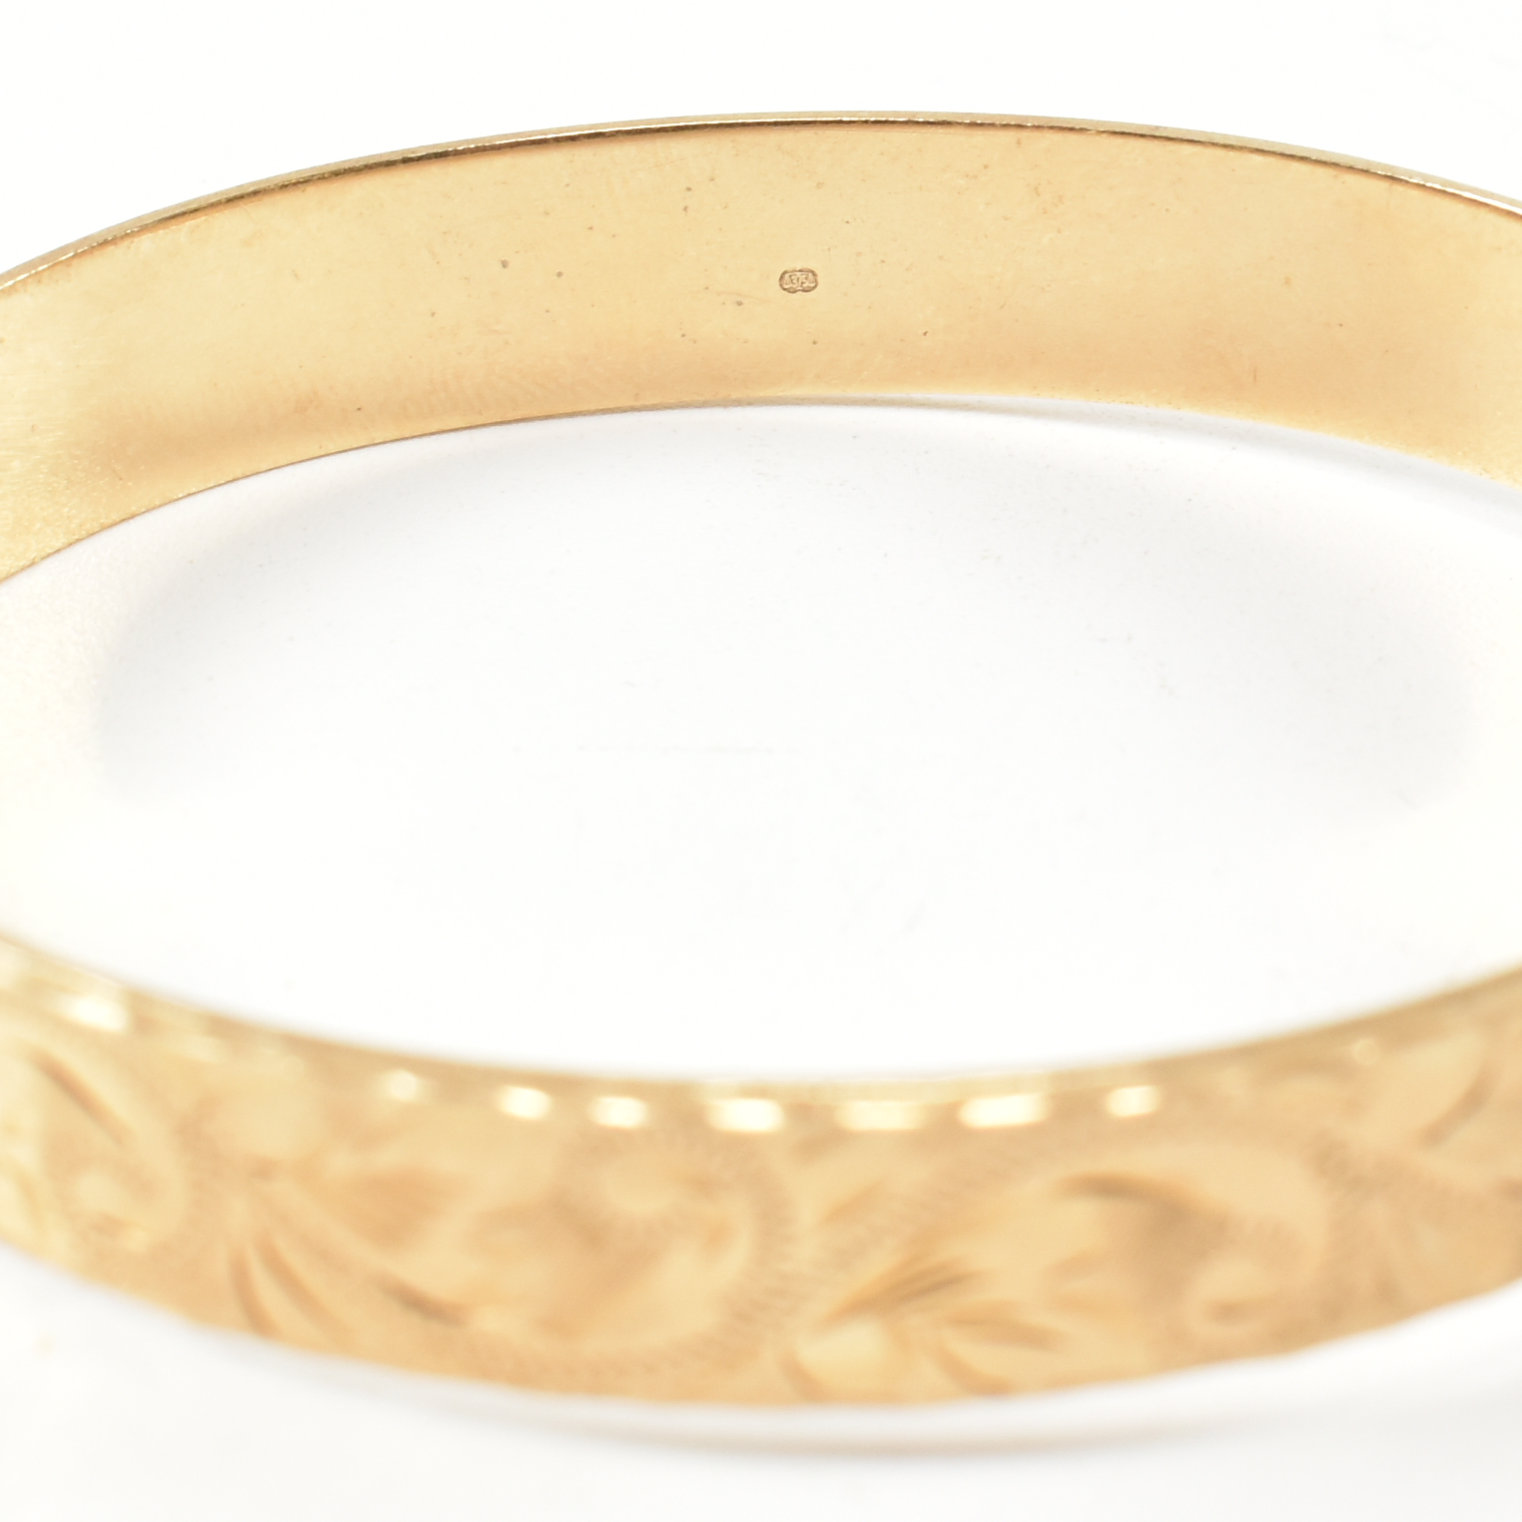 HALLMARKED 9CT GOLD HINGED BANGLE & A PAIR OF 9CT GOLD HOOP EARRINGS - Image 5 of 8